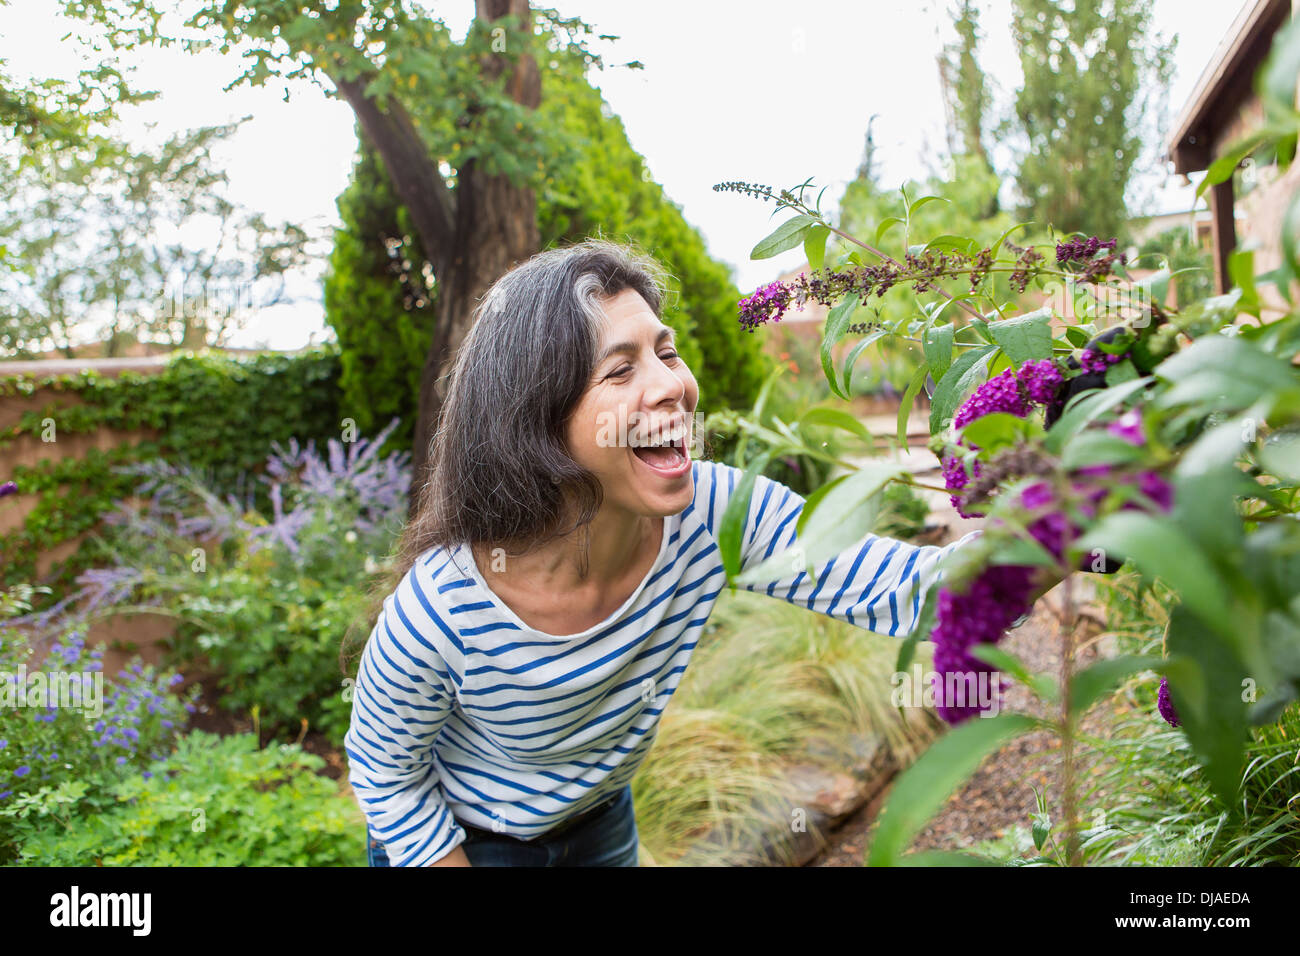 Hispanic woman looking at flowers in garden Stock Photo